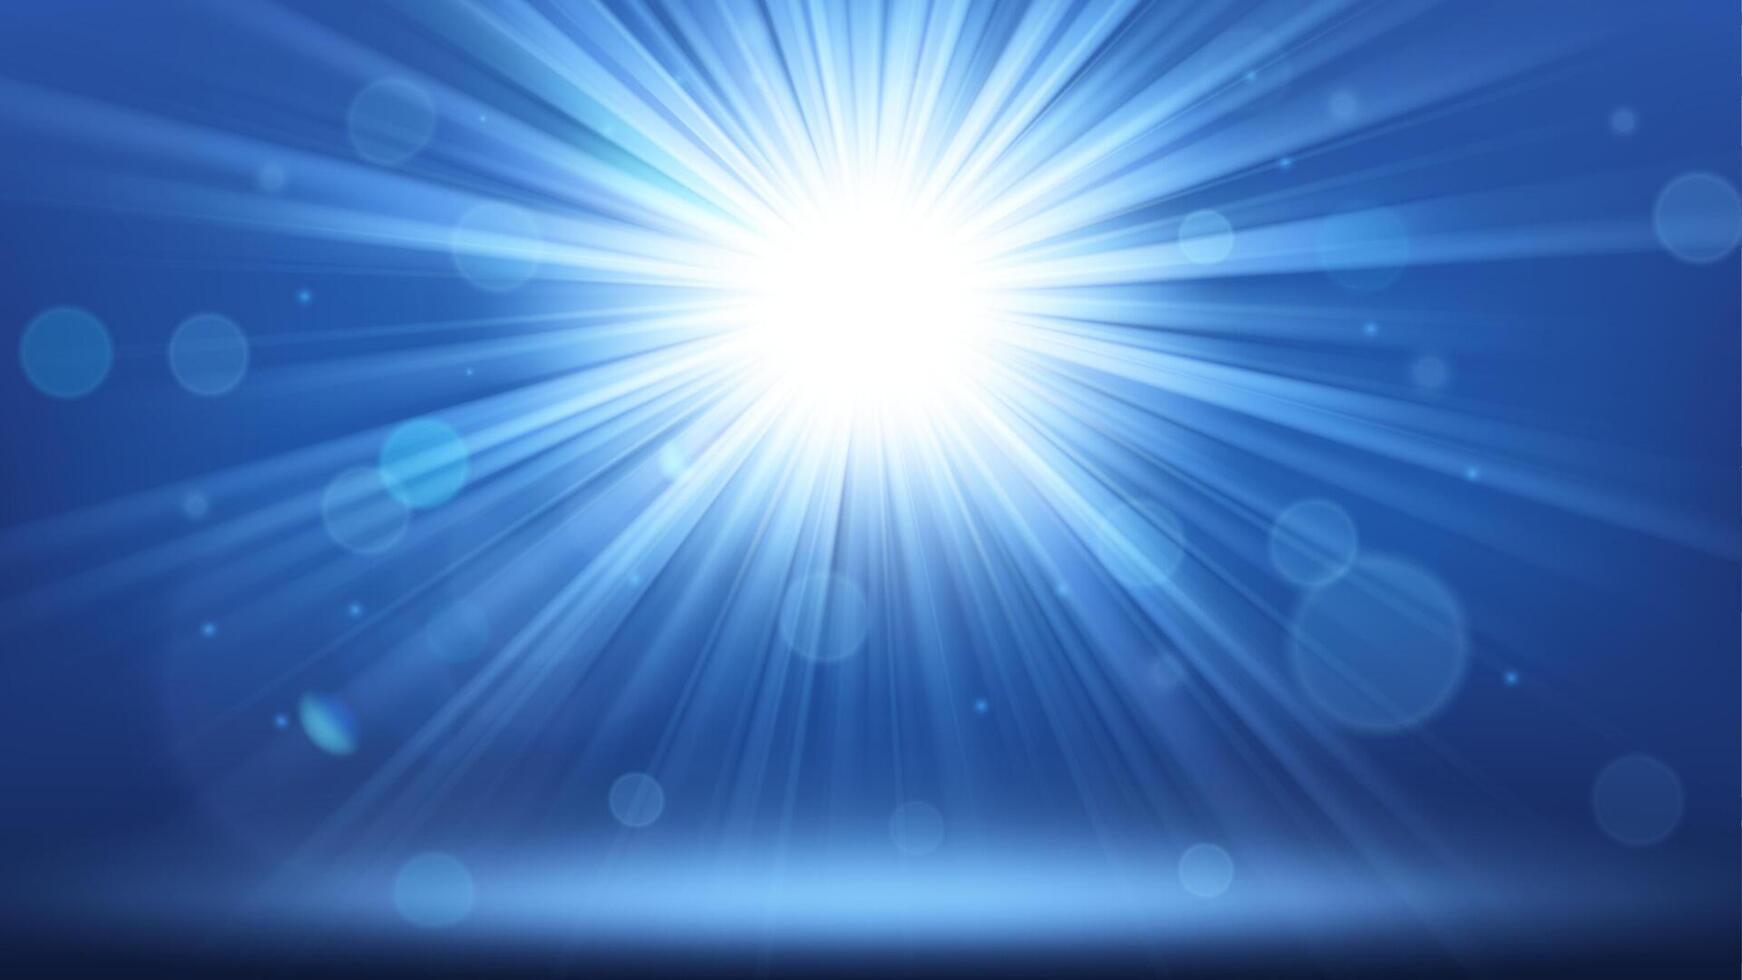 White Lights Shining with Lens Flare and Flying Particles on Blue Background, Vector Illustration